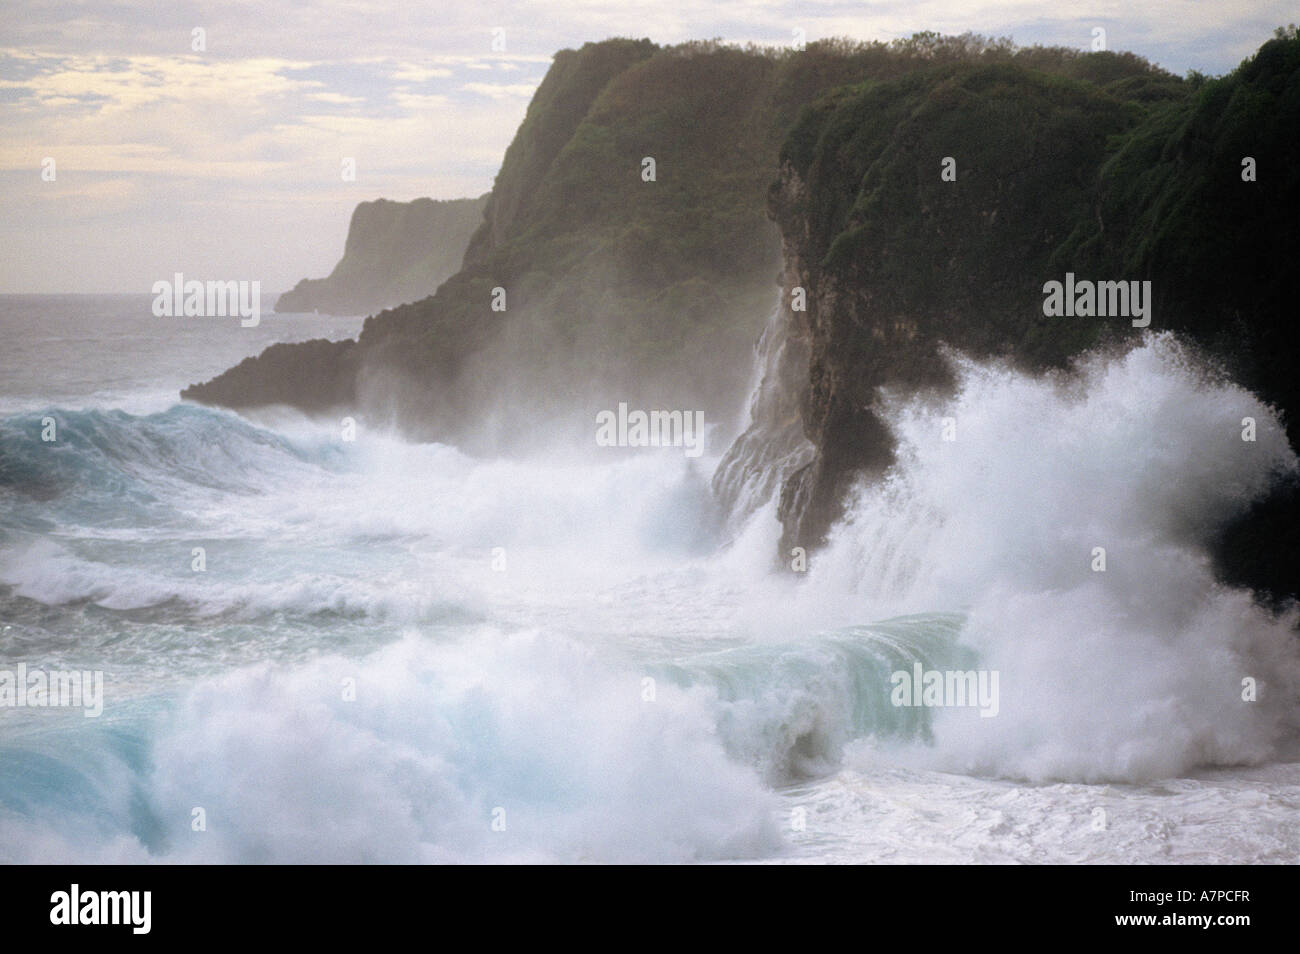 Storm surf from Super Typhoon Sudal crashing against sea cliffs Island of Guam USA Stock Photo